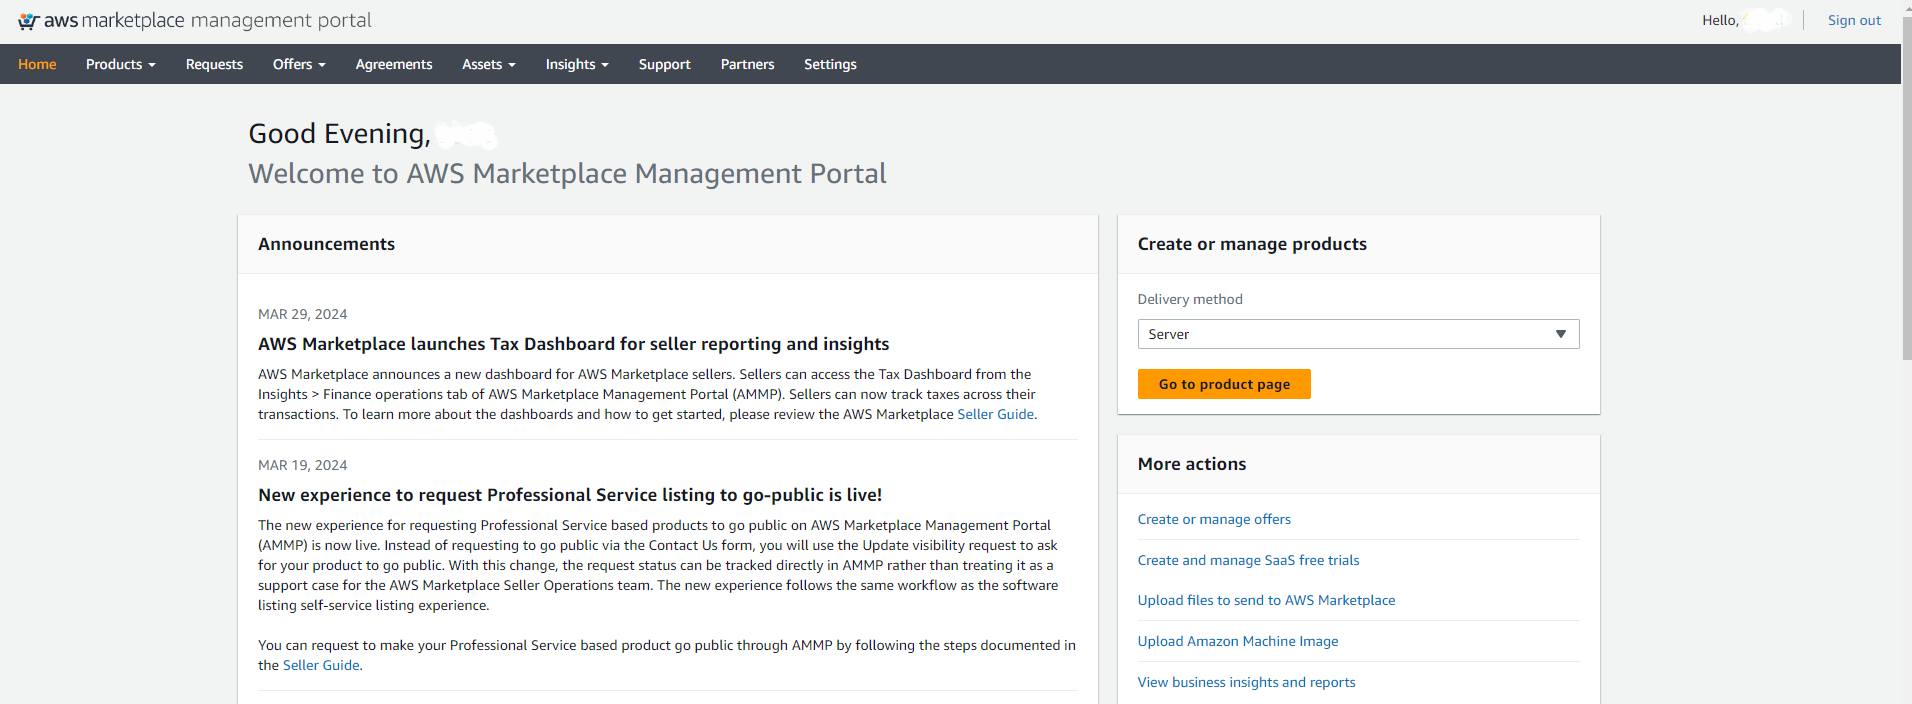 Submitting a product registration request to AWS Marketplace Portal